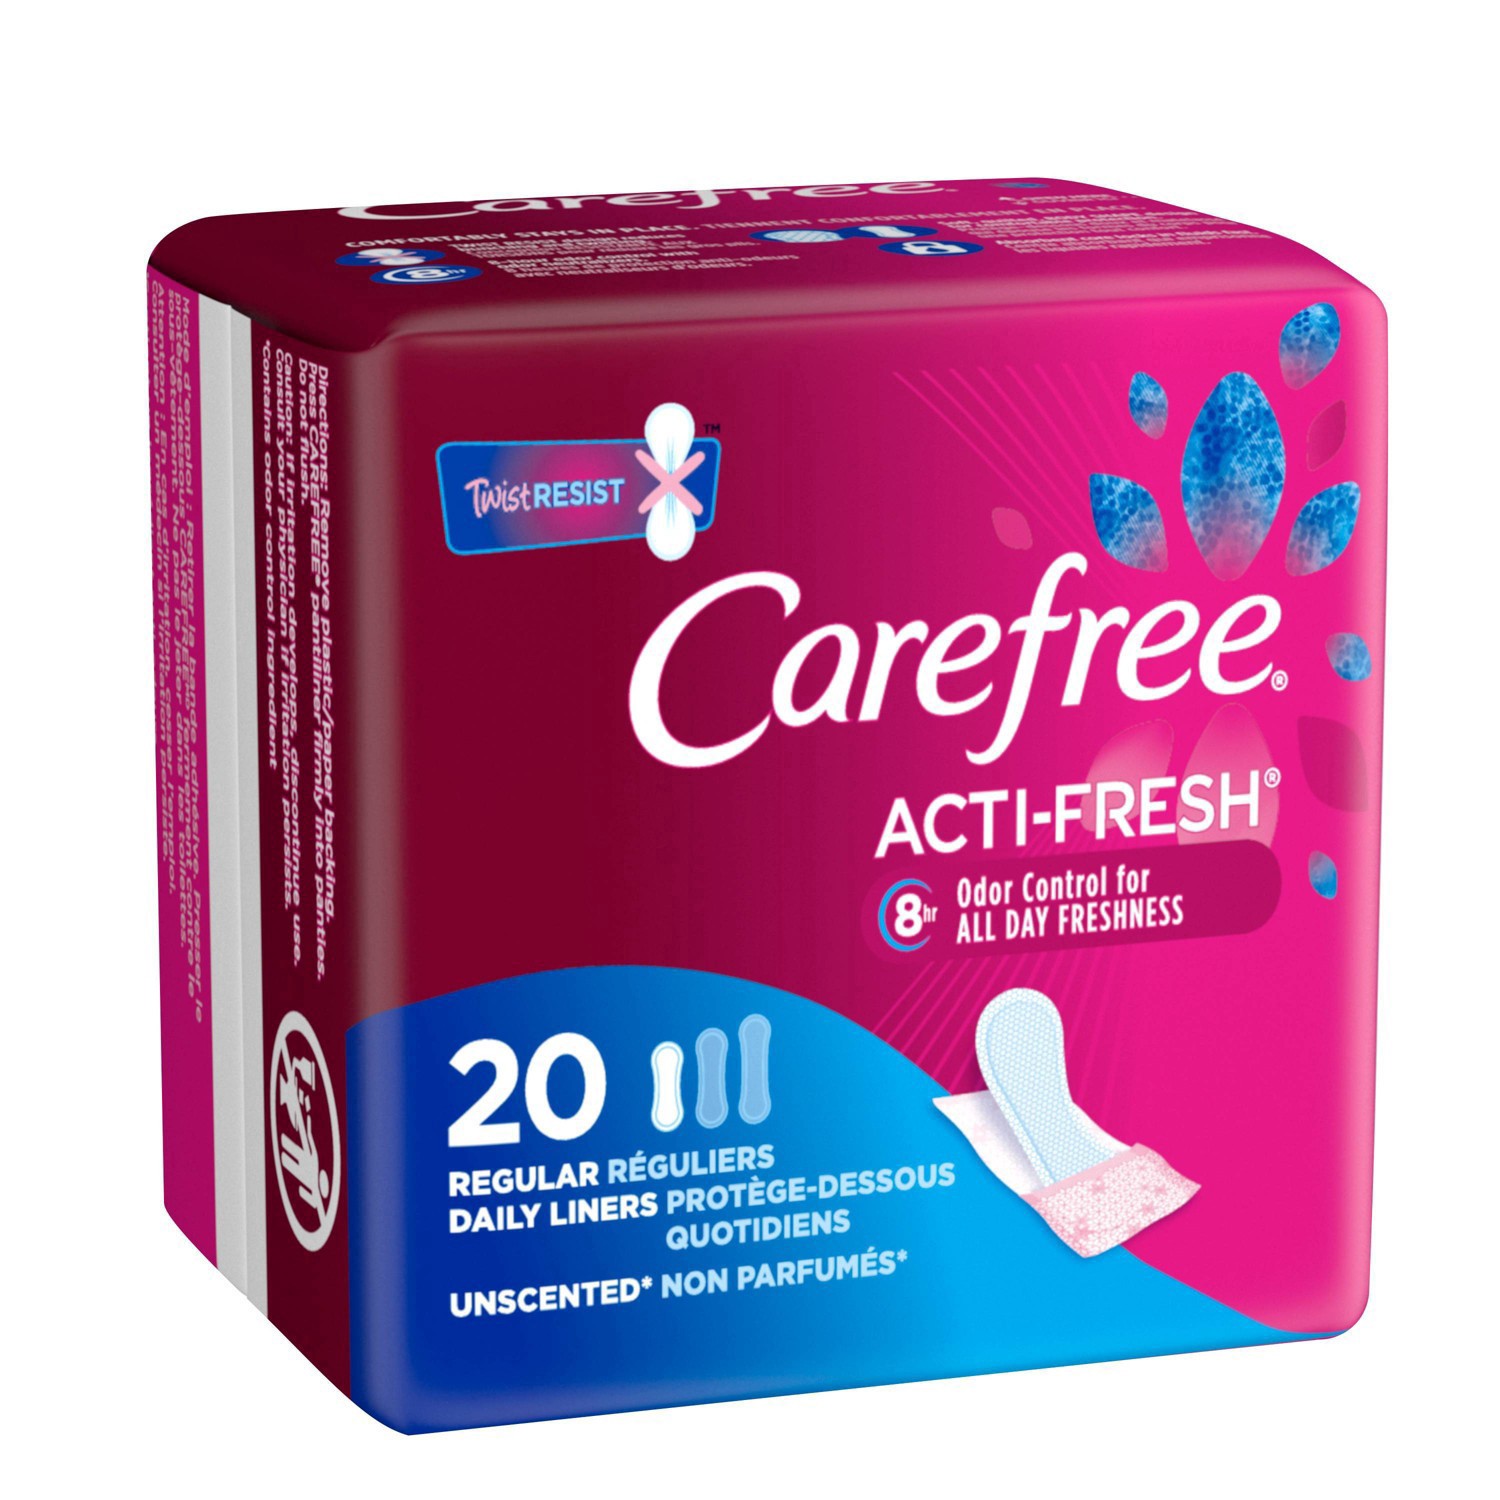 slide 7 of 67, Carefree Panty Liners, Regular Liners, Wrapped Unscented, 20 ct